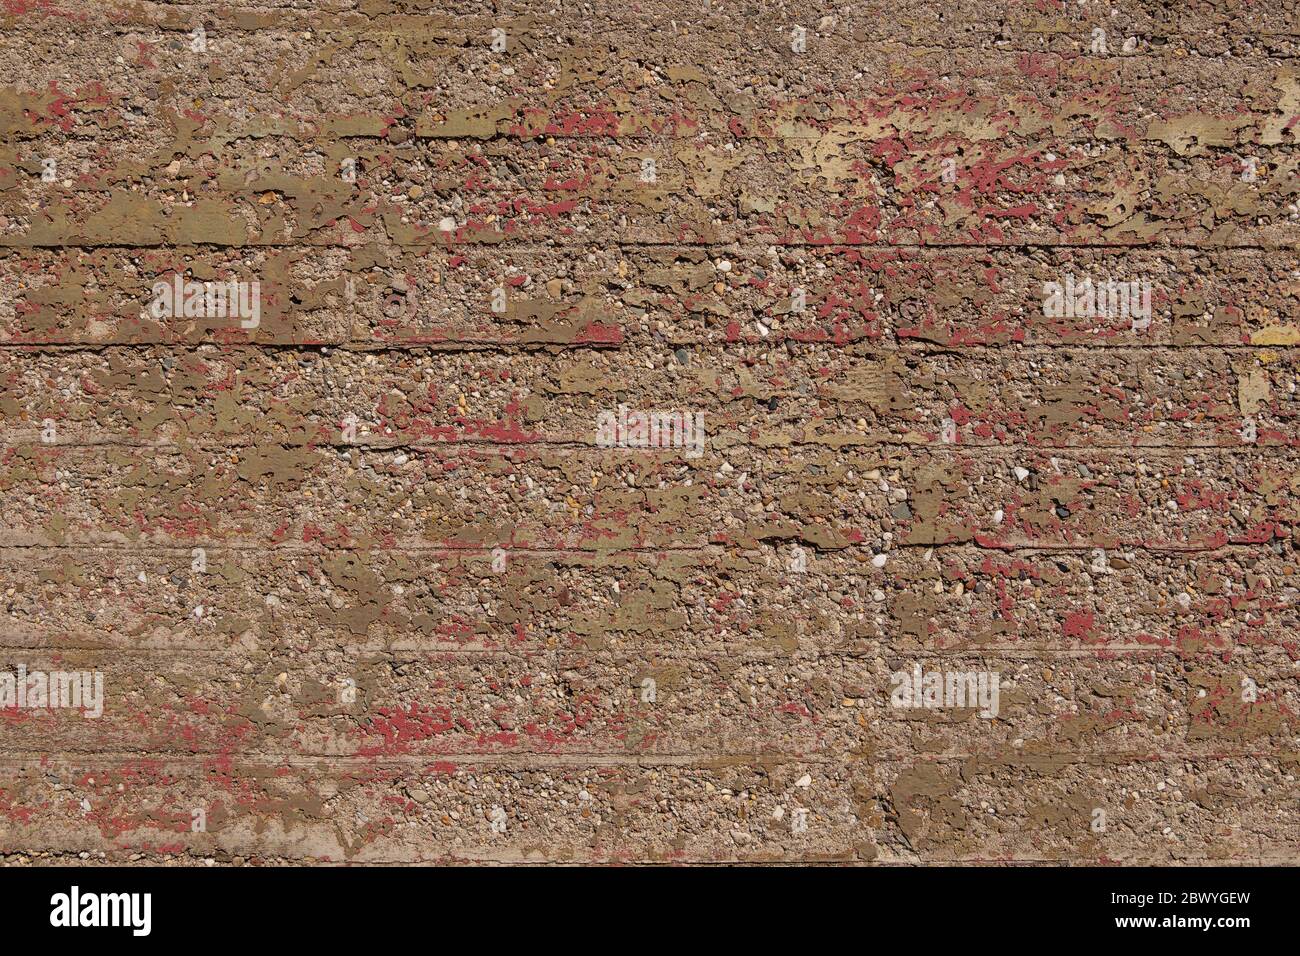 Old Raw grunge rough bumpy concrete texture with remaining scratch of red painted and corrosive surface. Texture of exterior old bunker. Stock Photo